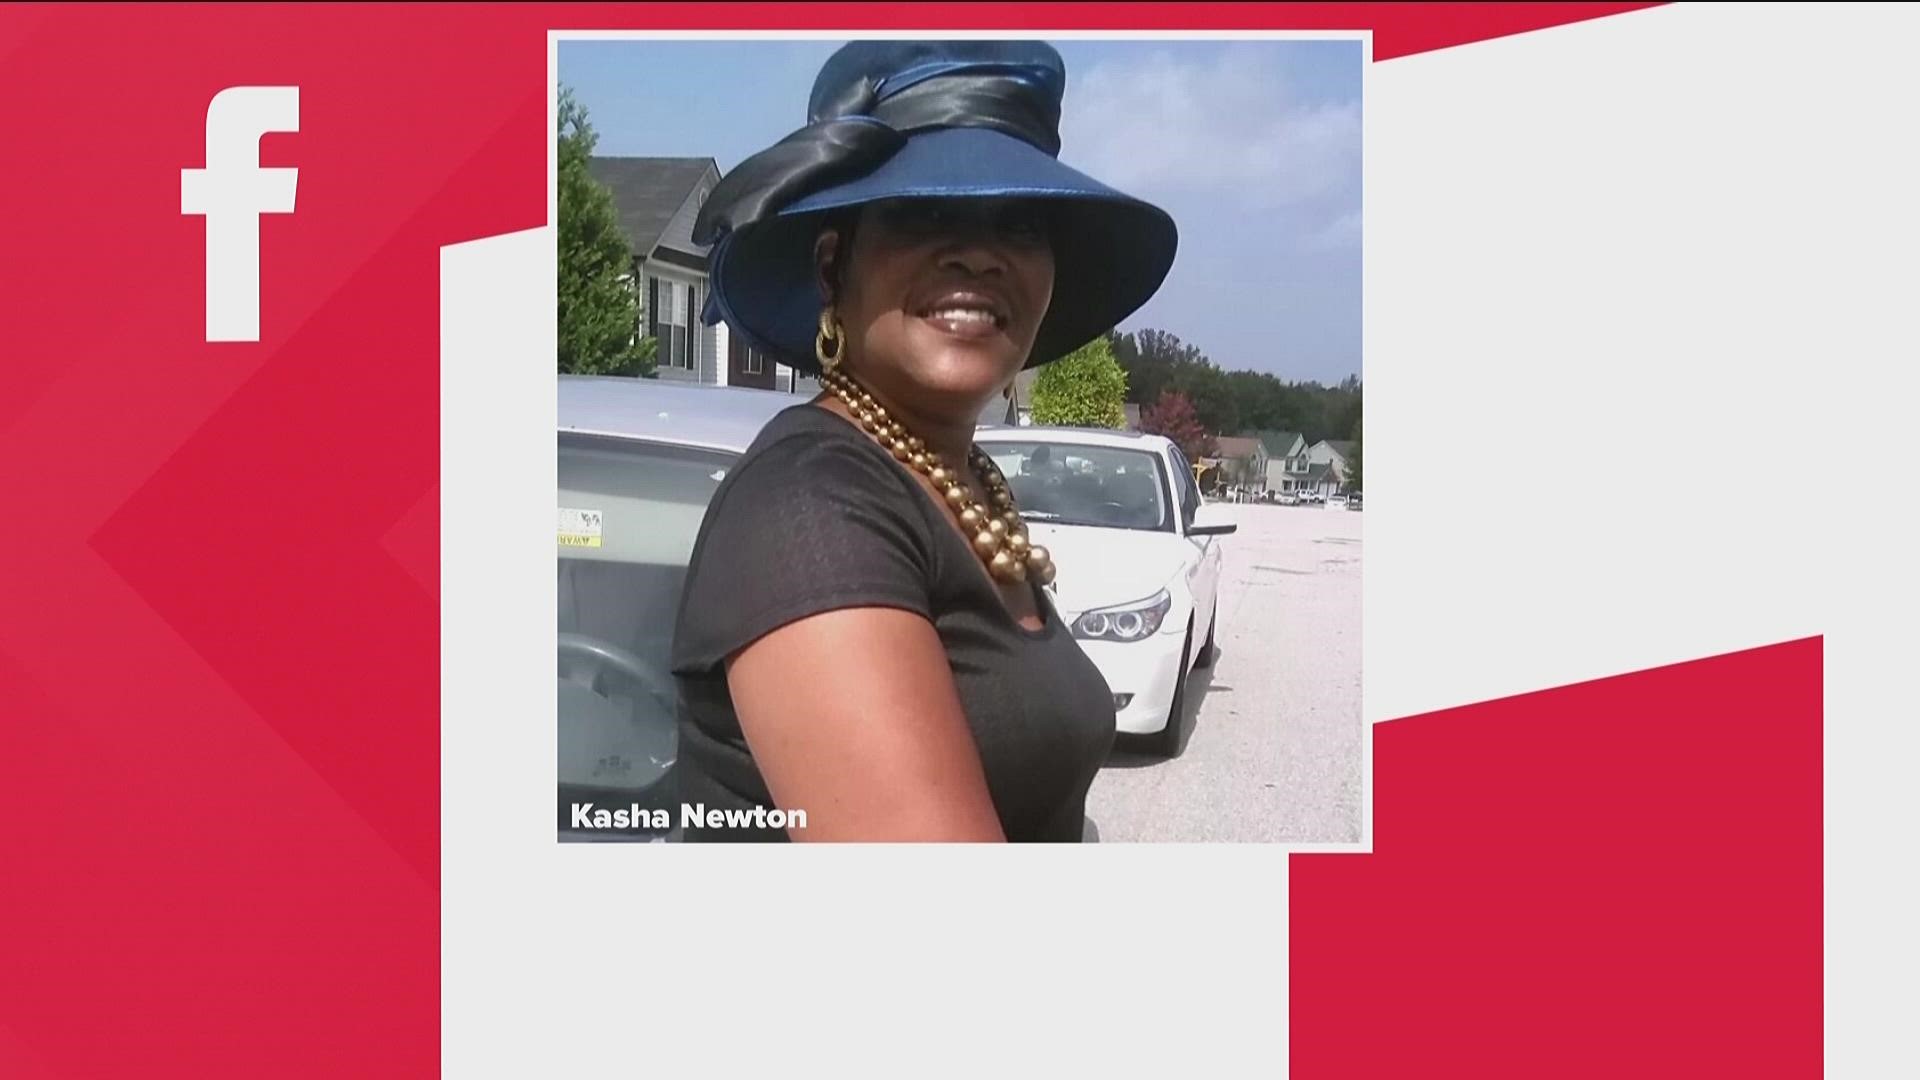 The woman died days after the shooting, according to investigators.